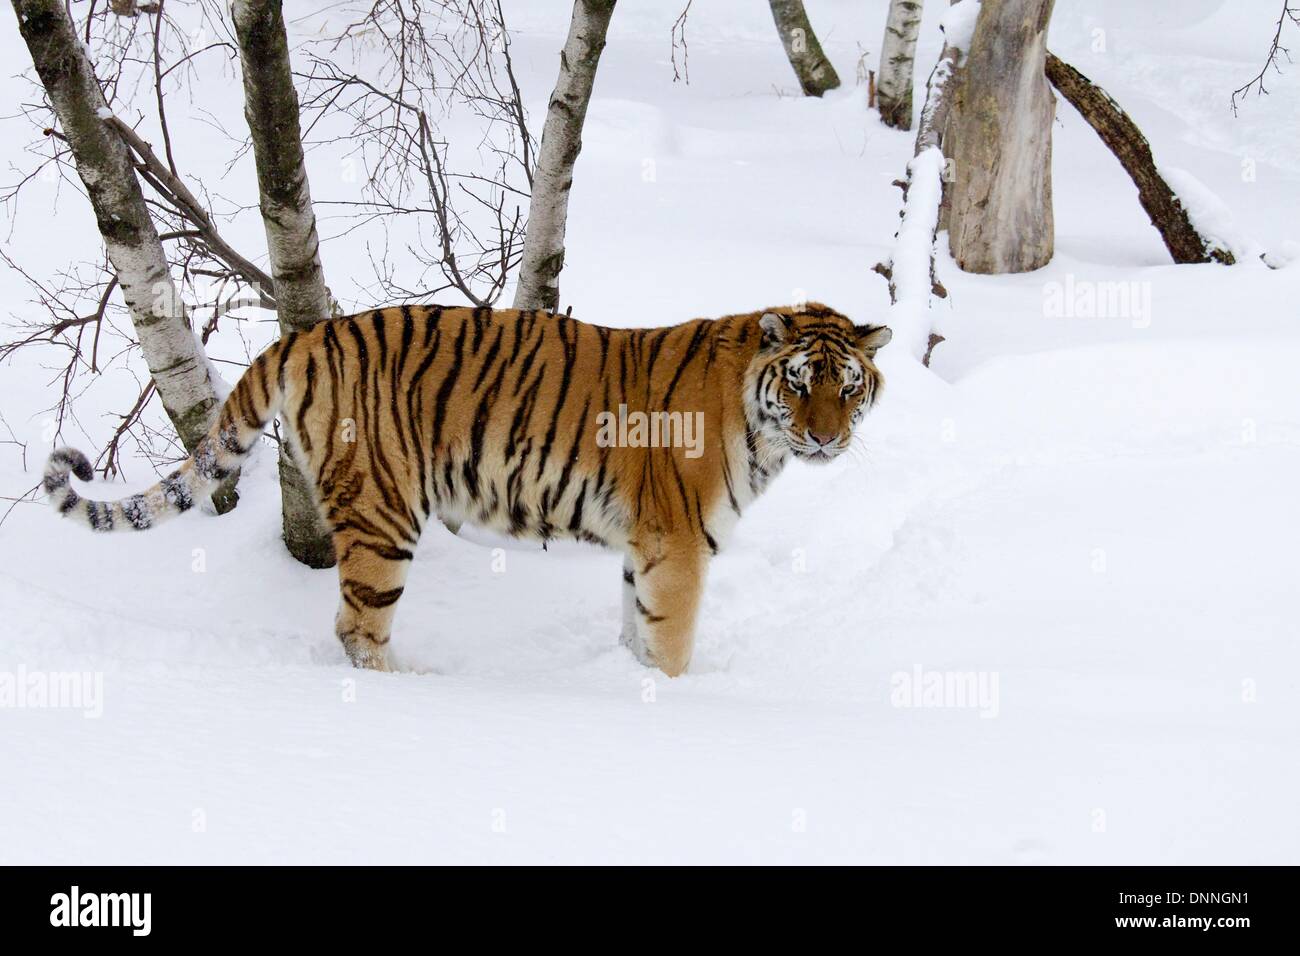 Chicago, Illinois, USA. 2nd January 2014. An Amur tiger surveys its snowy enclosure at Lincoln Park Zoo. A lake effect storm off Lake Michigan dumped several inches of fluffy powder on the area. Credit:  Todd Bannor/Alamy Live News Stock Photo